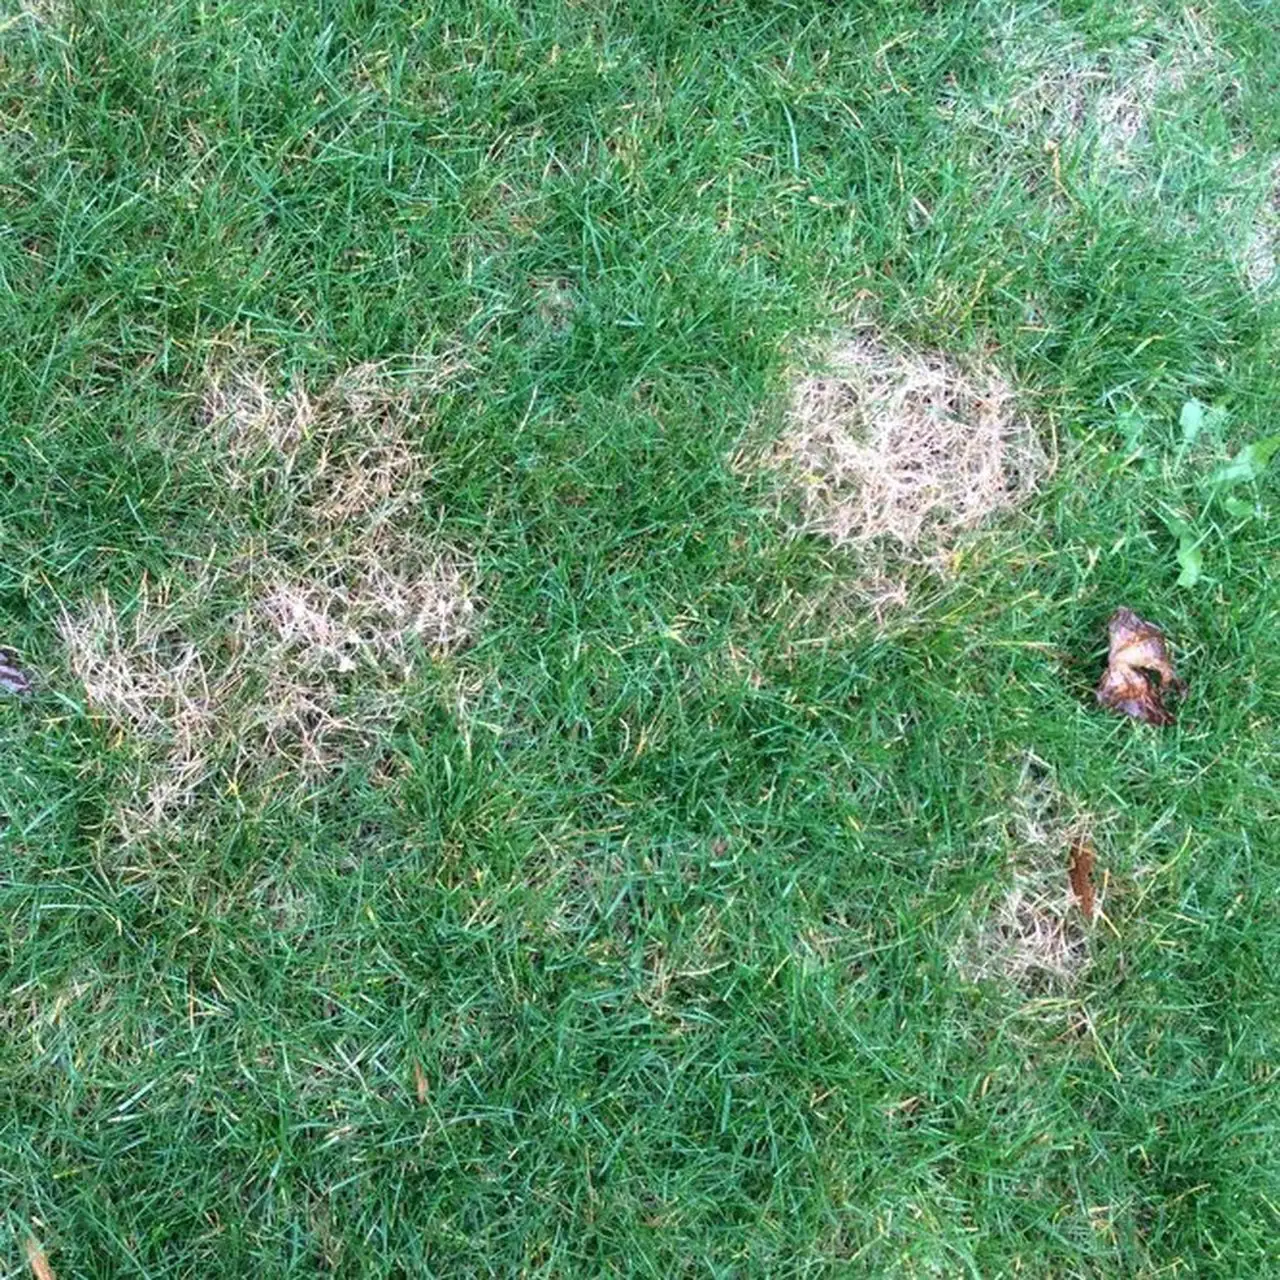 How to fight red thread lawn disease: Ask an expert